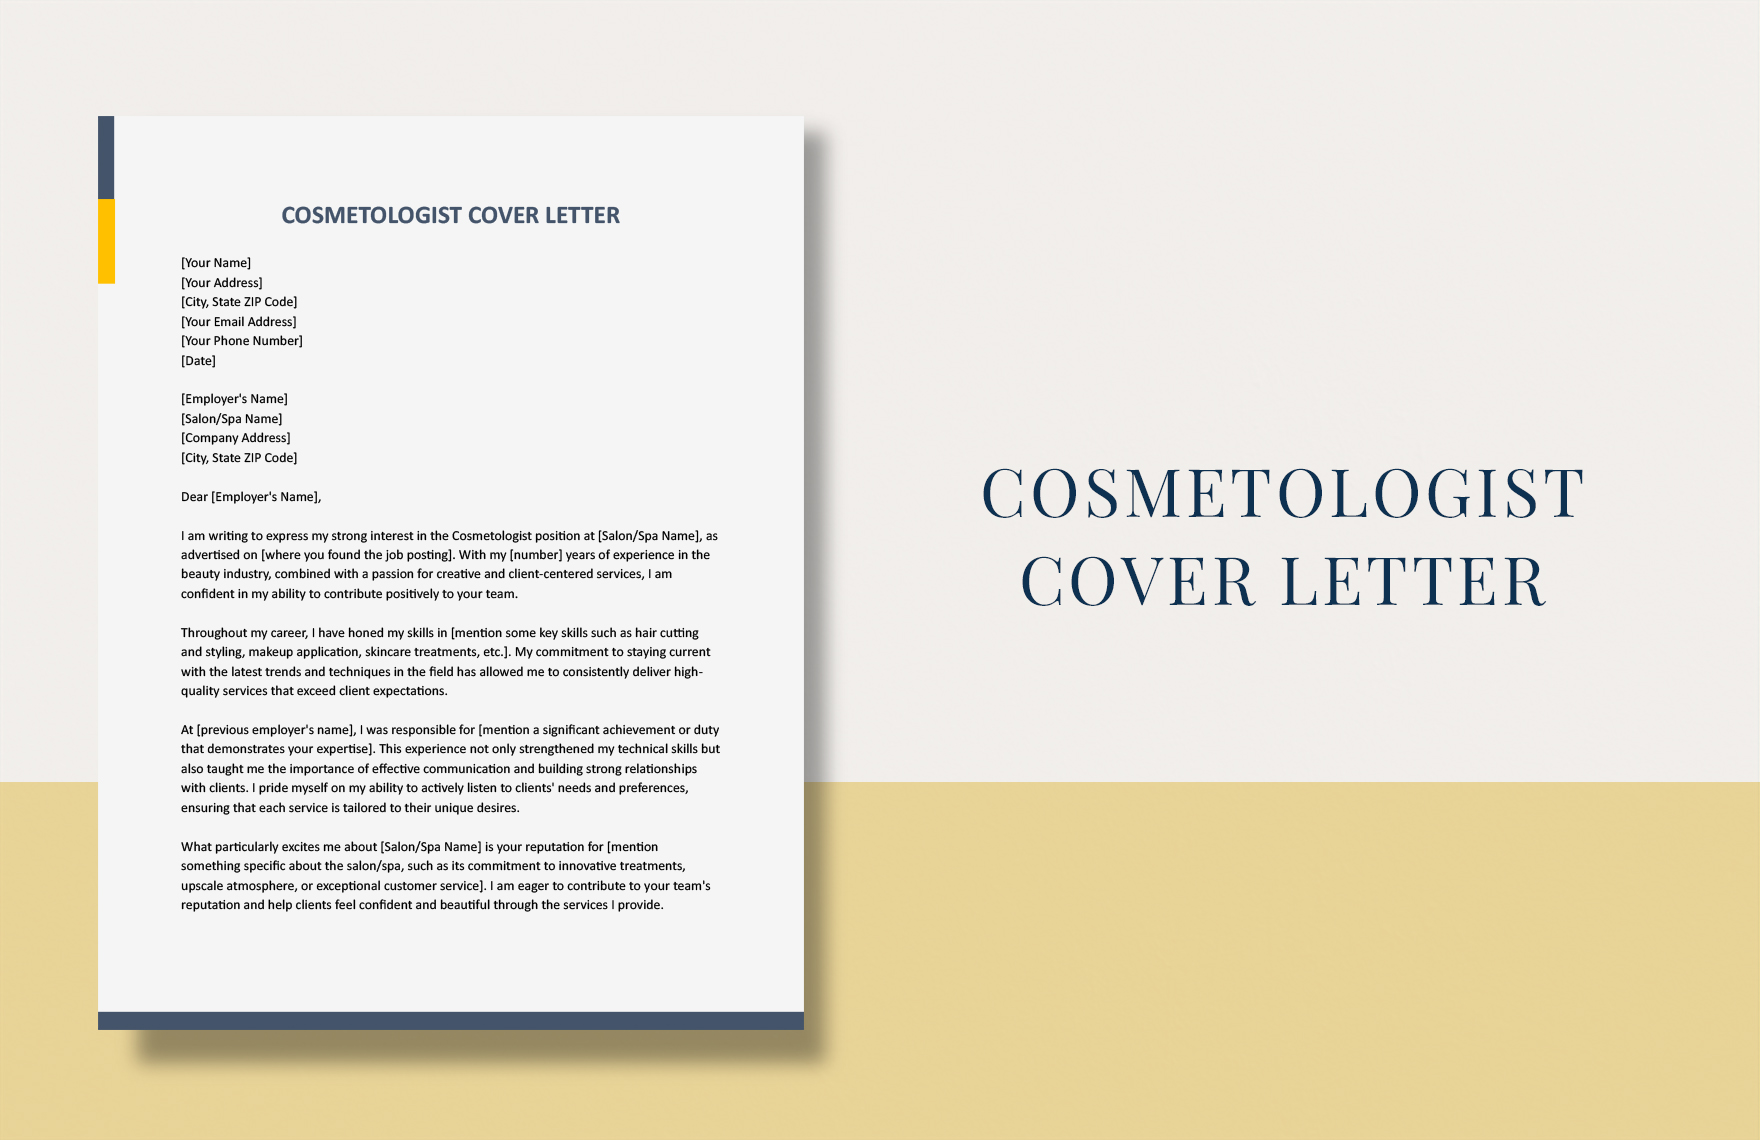 Cosmetologist Cover Letter